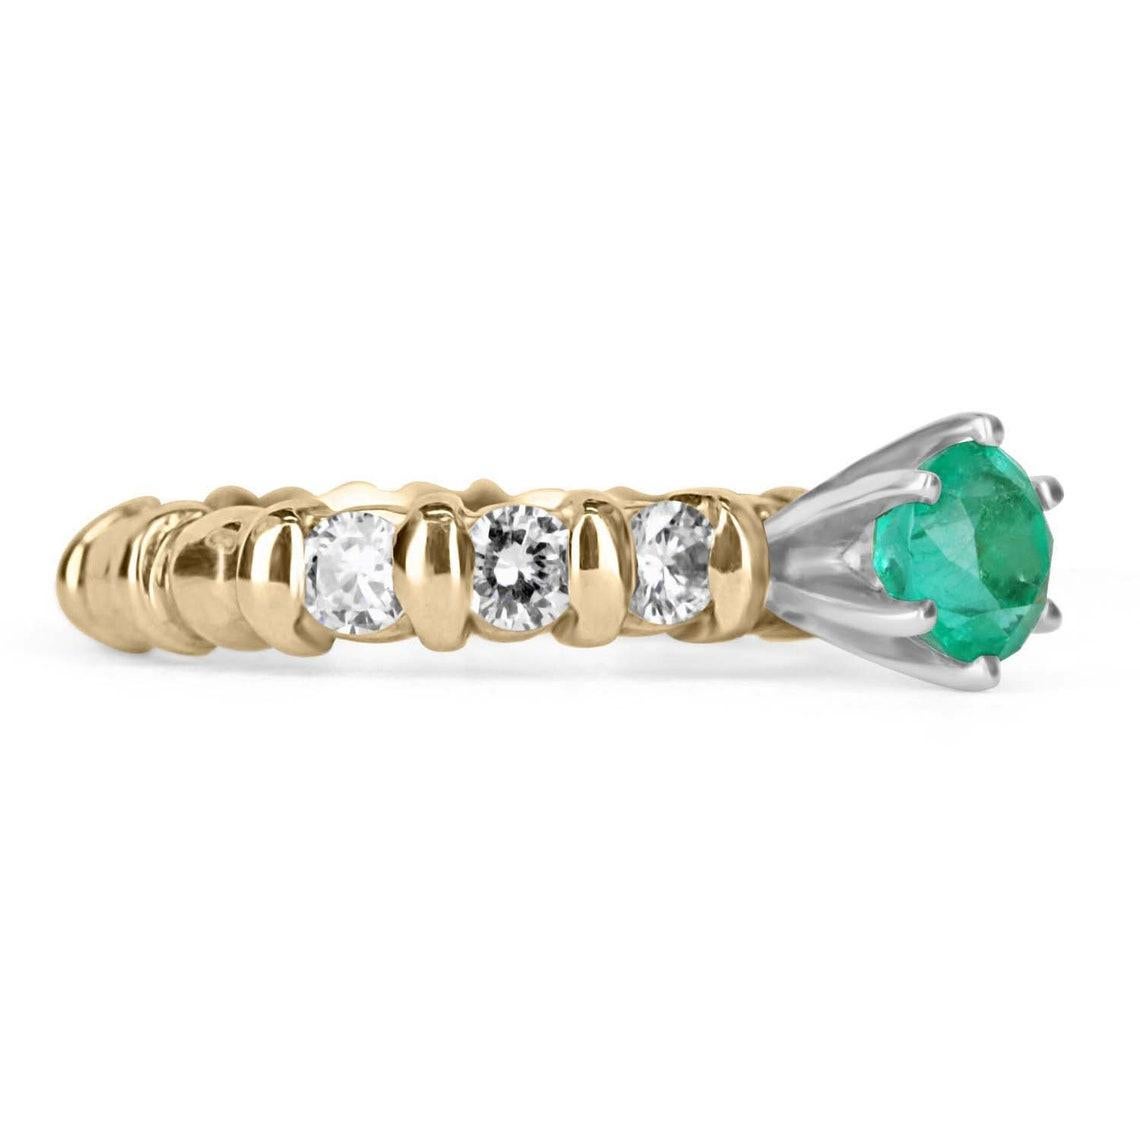 Elegantly displayed is a 1.69 Carats stylish round Colombian emerald and round diamond engagement/cocktail ring yellow gold 18K. This romantic piece is captivating from every angle and catches your eye at the very first glimpse. The center features